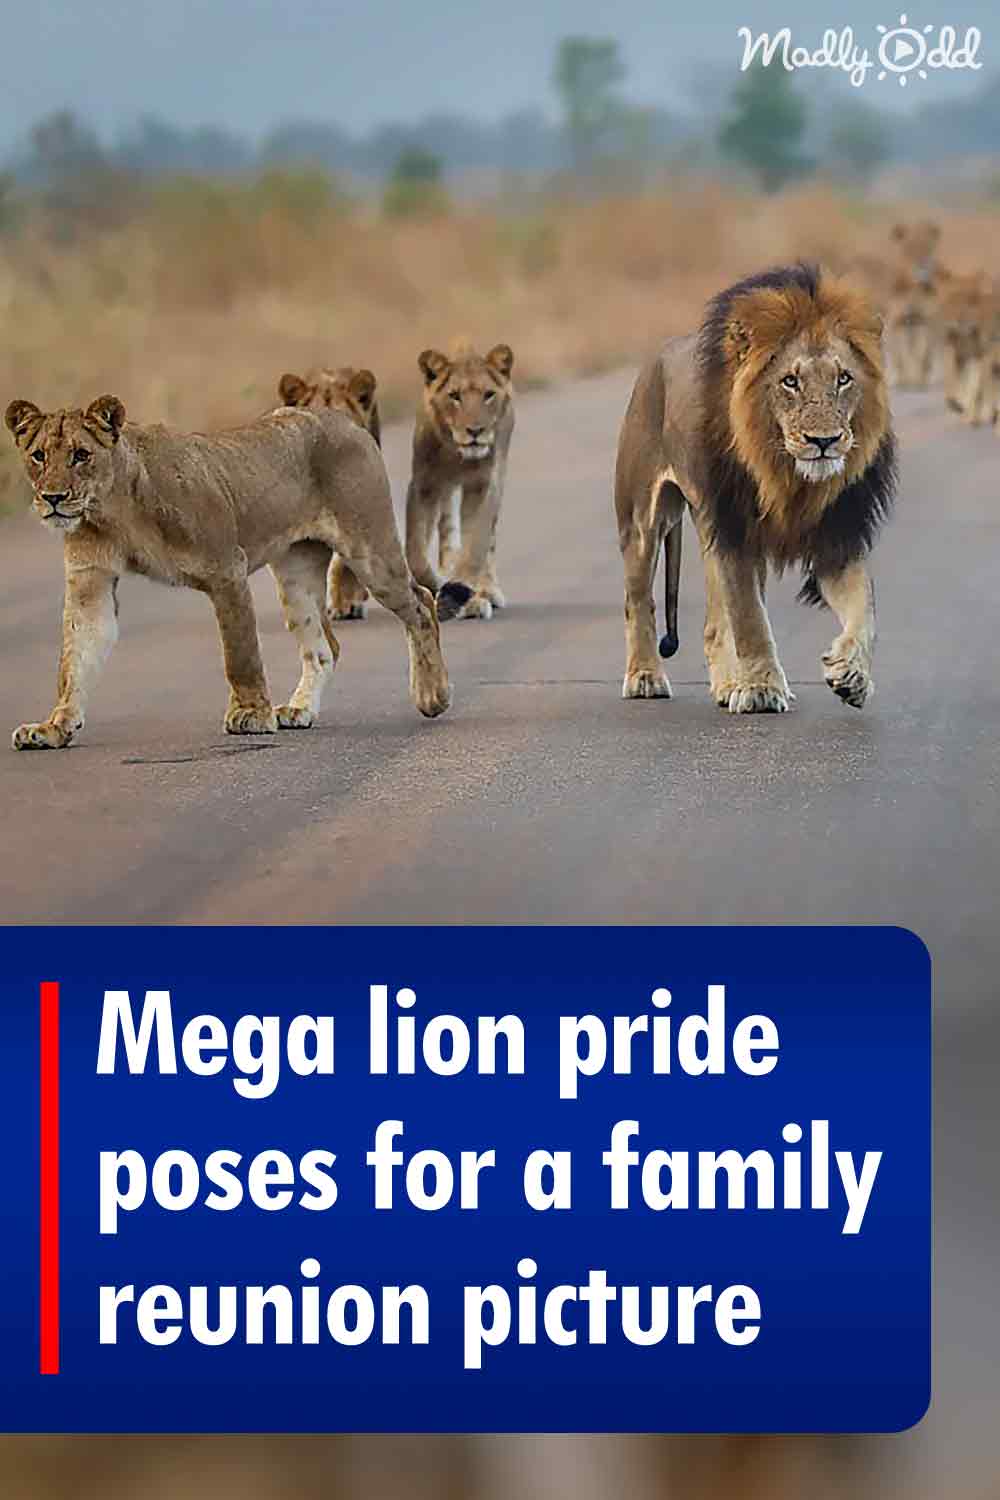 Mega lion pride poses for a family reunion picture